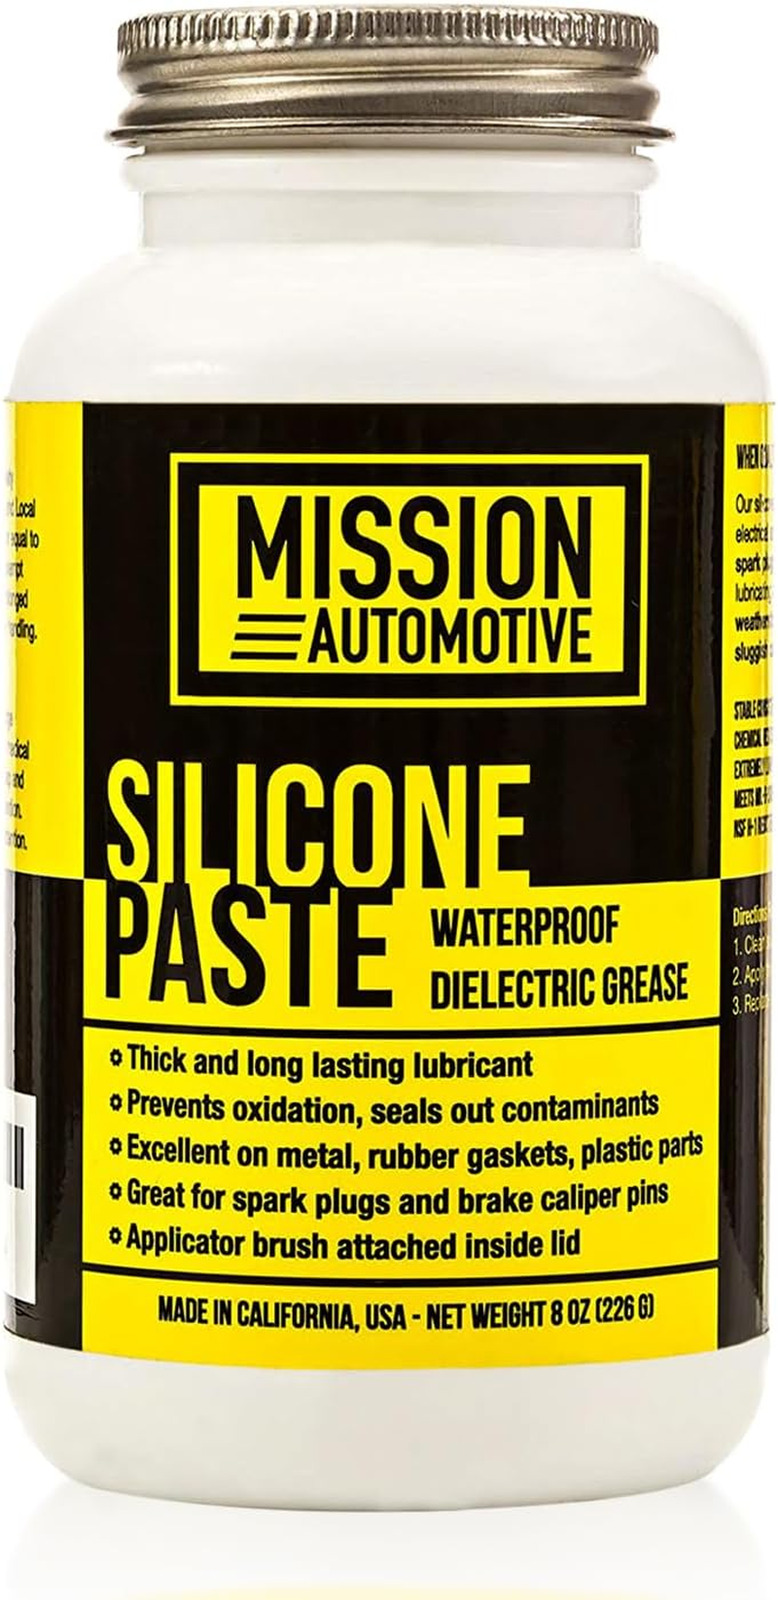 Dielectric Grease/Silicone Paste/Waterproof Marine Grease (8 Oz.) Made in USA- E